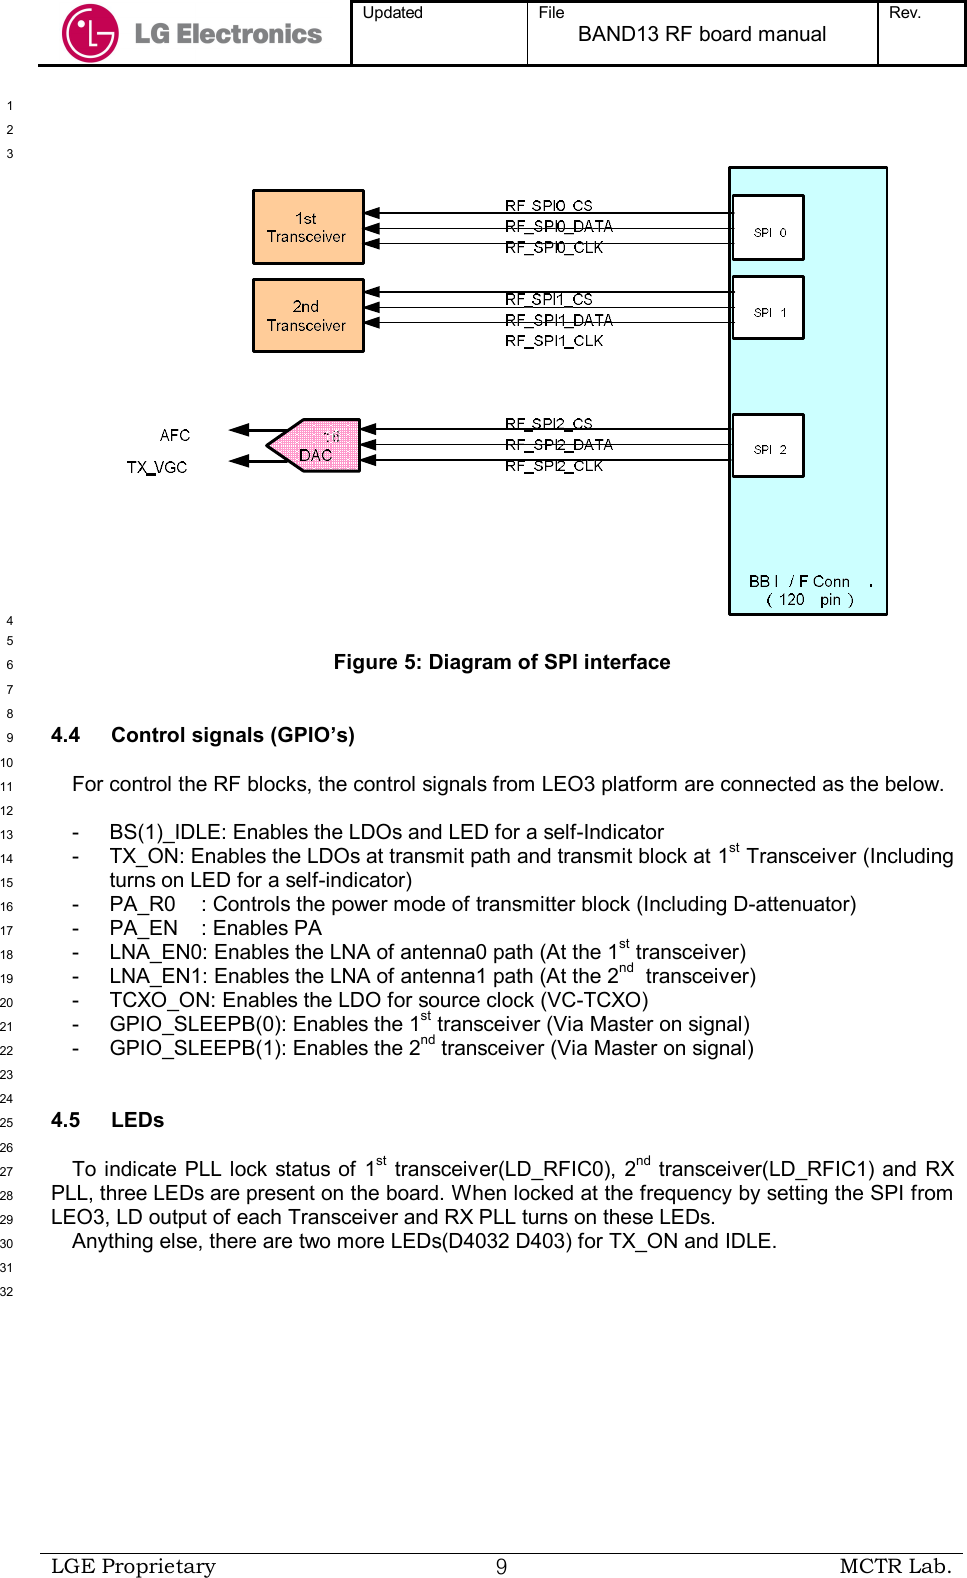  Updated  File BAND13 RF board manual Rev.    LGE Proprietary  ９ MCTR Lab.   1  2  3  4  5 Figure 5: Diagram of SPI interface 6  7  8 4.4  Control signals (GPIO’s) 9  10 For control the RF blocks, the control signals from LEO3 platform are connected as the below. 11  12 -  BS(1)_IDLE: Enables the LDOs and LED for a self-Indicator 13 -  TX_ON: Enables the LDOs at transmit path and transmit block at 1st Transceiver (Including 14 turns on LED for a self-indicator) 15 -  PA_R0  : Controls the power mode of transmitter block (Including D-attenuator) 16 -  PA_EN  : Enables PA 17 -  LNA_EN0: Enables the LNA of antenna0 path (At the 1st transceiver) 18 -  LNA_EN1: Enables the LNA of antenna1 path (At the 2nd  transceiver) 19 -  TCXO_ON: Enables the LDO for source clock (VC-TCXO) 20 -  GPIO_SLEEPB(0): Enables the 1st transceiver (Via Master on signal) 21 -  GPIO_SLEEPB(1): Enables the 2nd transceiver (Via Master on signal) 22  23  24 4.5  LEDs 25  26 To indicate PLL lock status of 1st transceiver(LD_RFIC0), 2nd transceiver(LD_RFIC1) and  RX 27 PLL, three LEDs are present on the board. When locked at the frequency by setting the SPI from 28 LEO3, LD output of each Transceiver and RX PLL turns on these LEDs. 29 Anything else, there are two more LEDs(D4032 D403) for TX_ON and IDLE.  30  31  32 